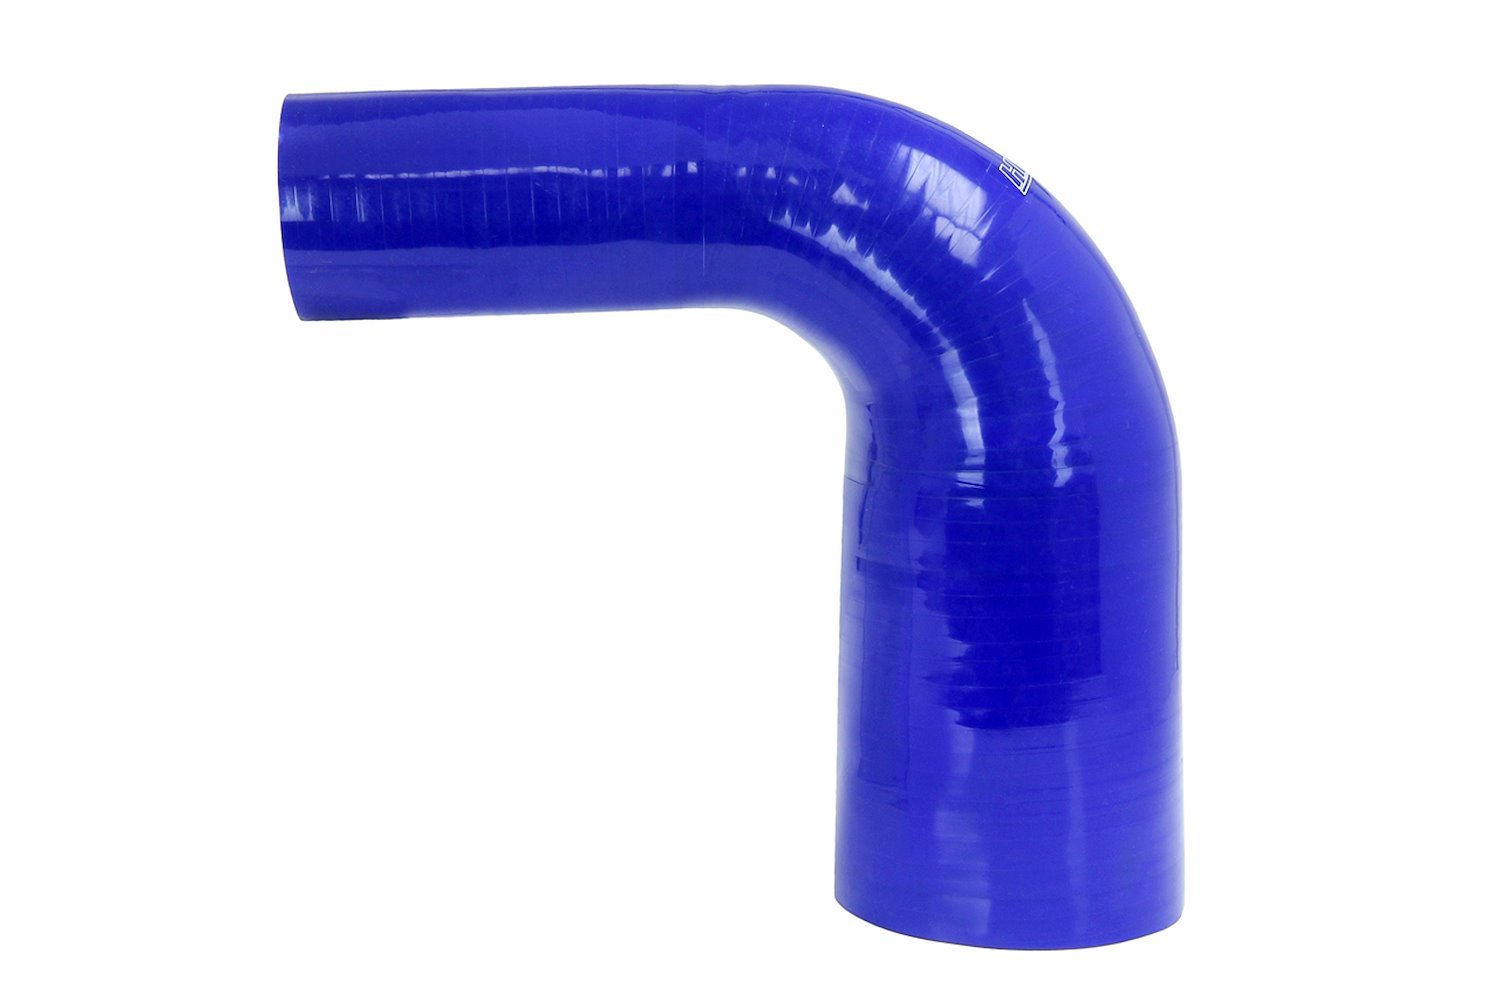 HTSER90-250-300-BLUE Silicone 90-Degree Elbow Hose, High-Temp 4-Ply Reinforced, 2-1/2 in. - 3 in. ID, Blue